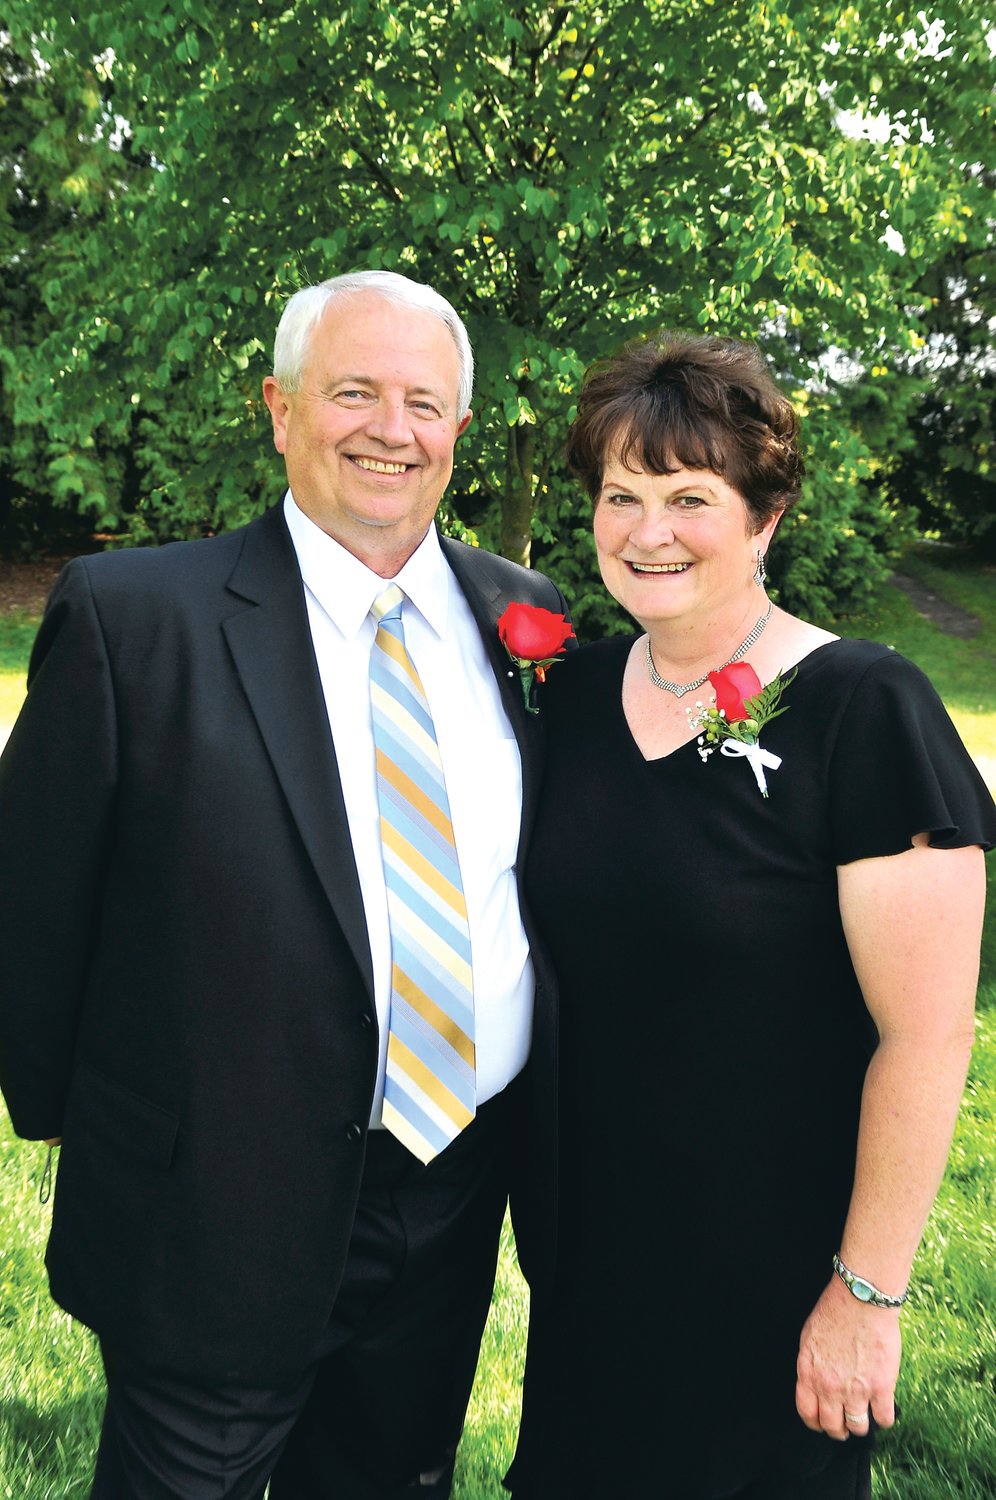 Dan Swecker is pictured with his wife, Debby, in this photograph provided by the Swecker family.